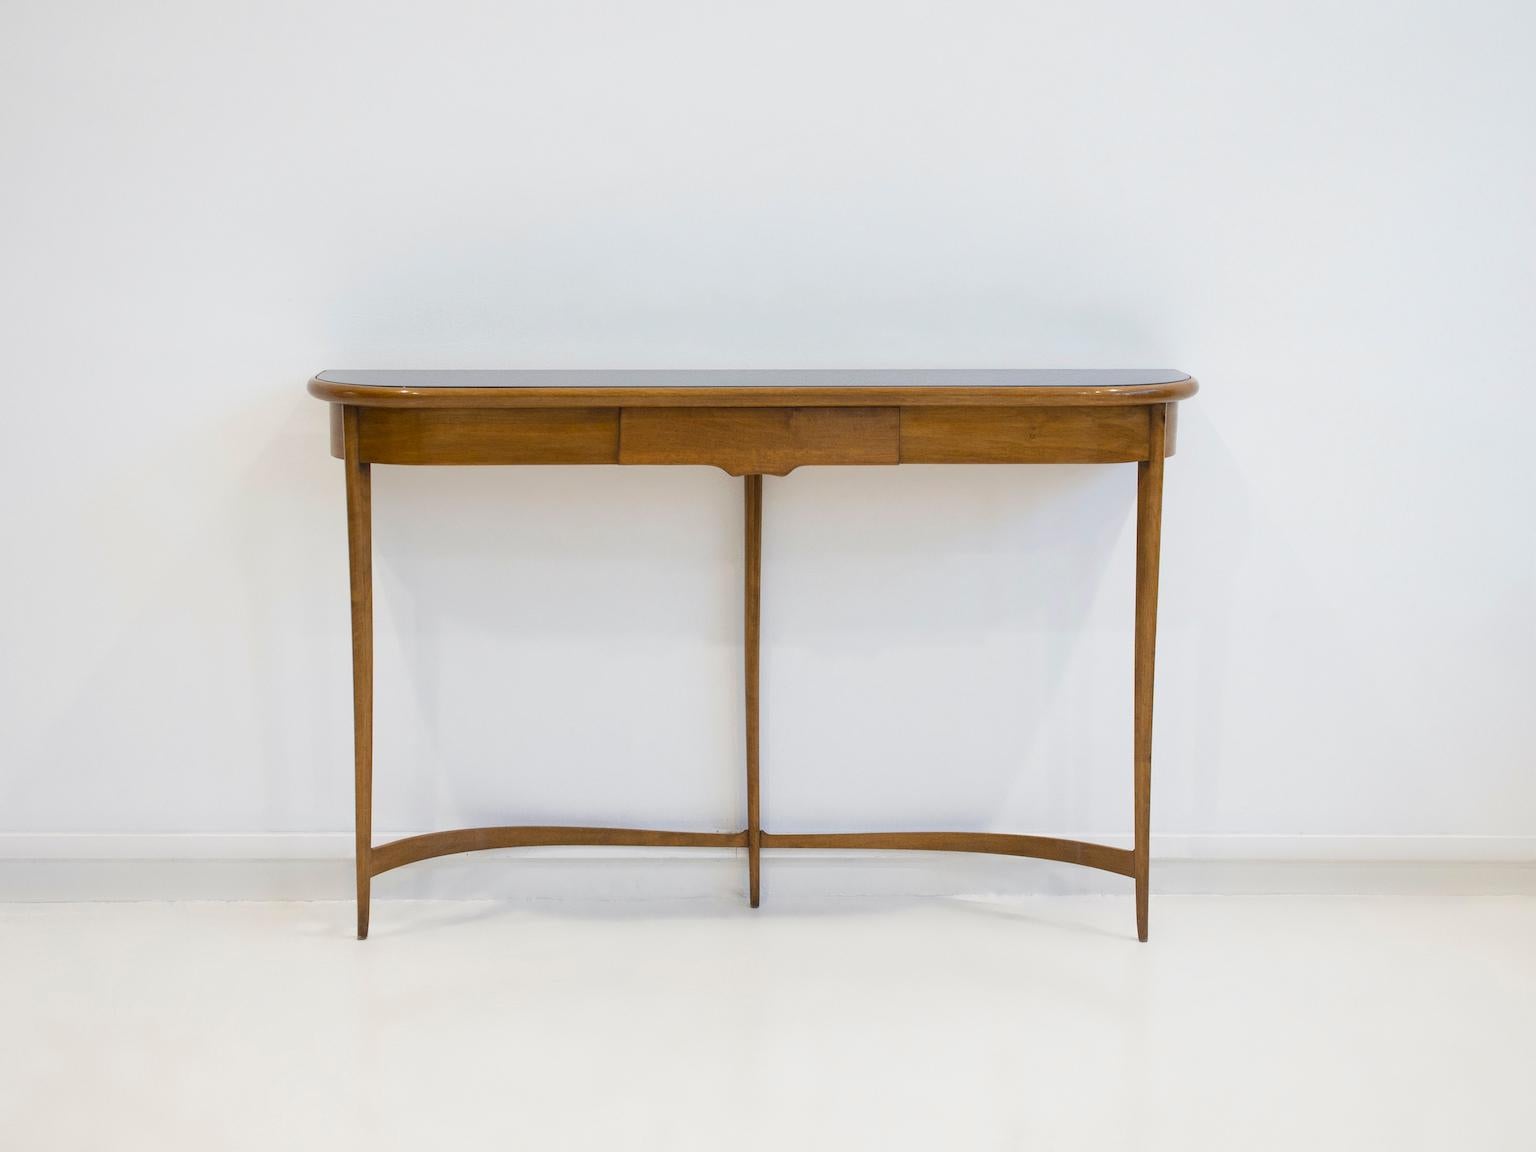 Console table of lacquered walnut wood with dark stained glass top. Designed by Carlo Enrico Rava in the 1950's. The console has one drawer, rounded edges and stands on three legs.